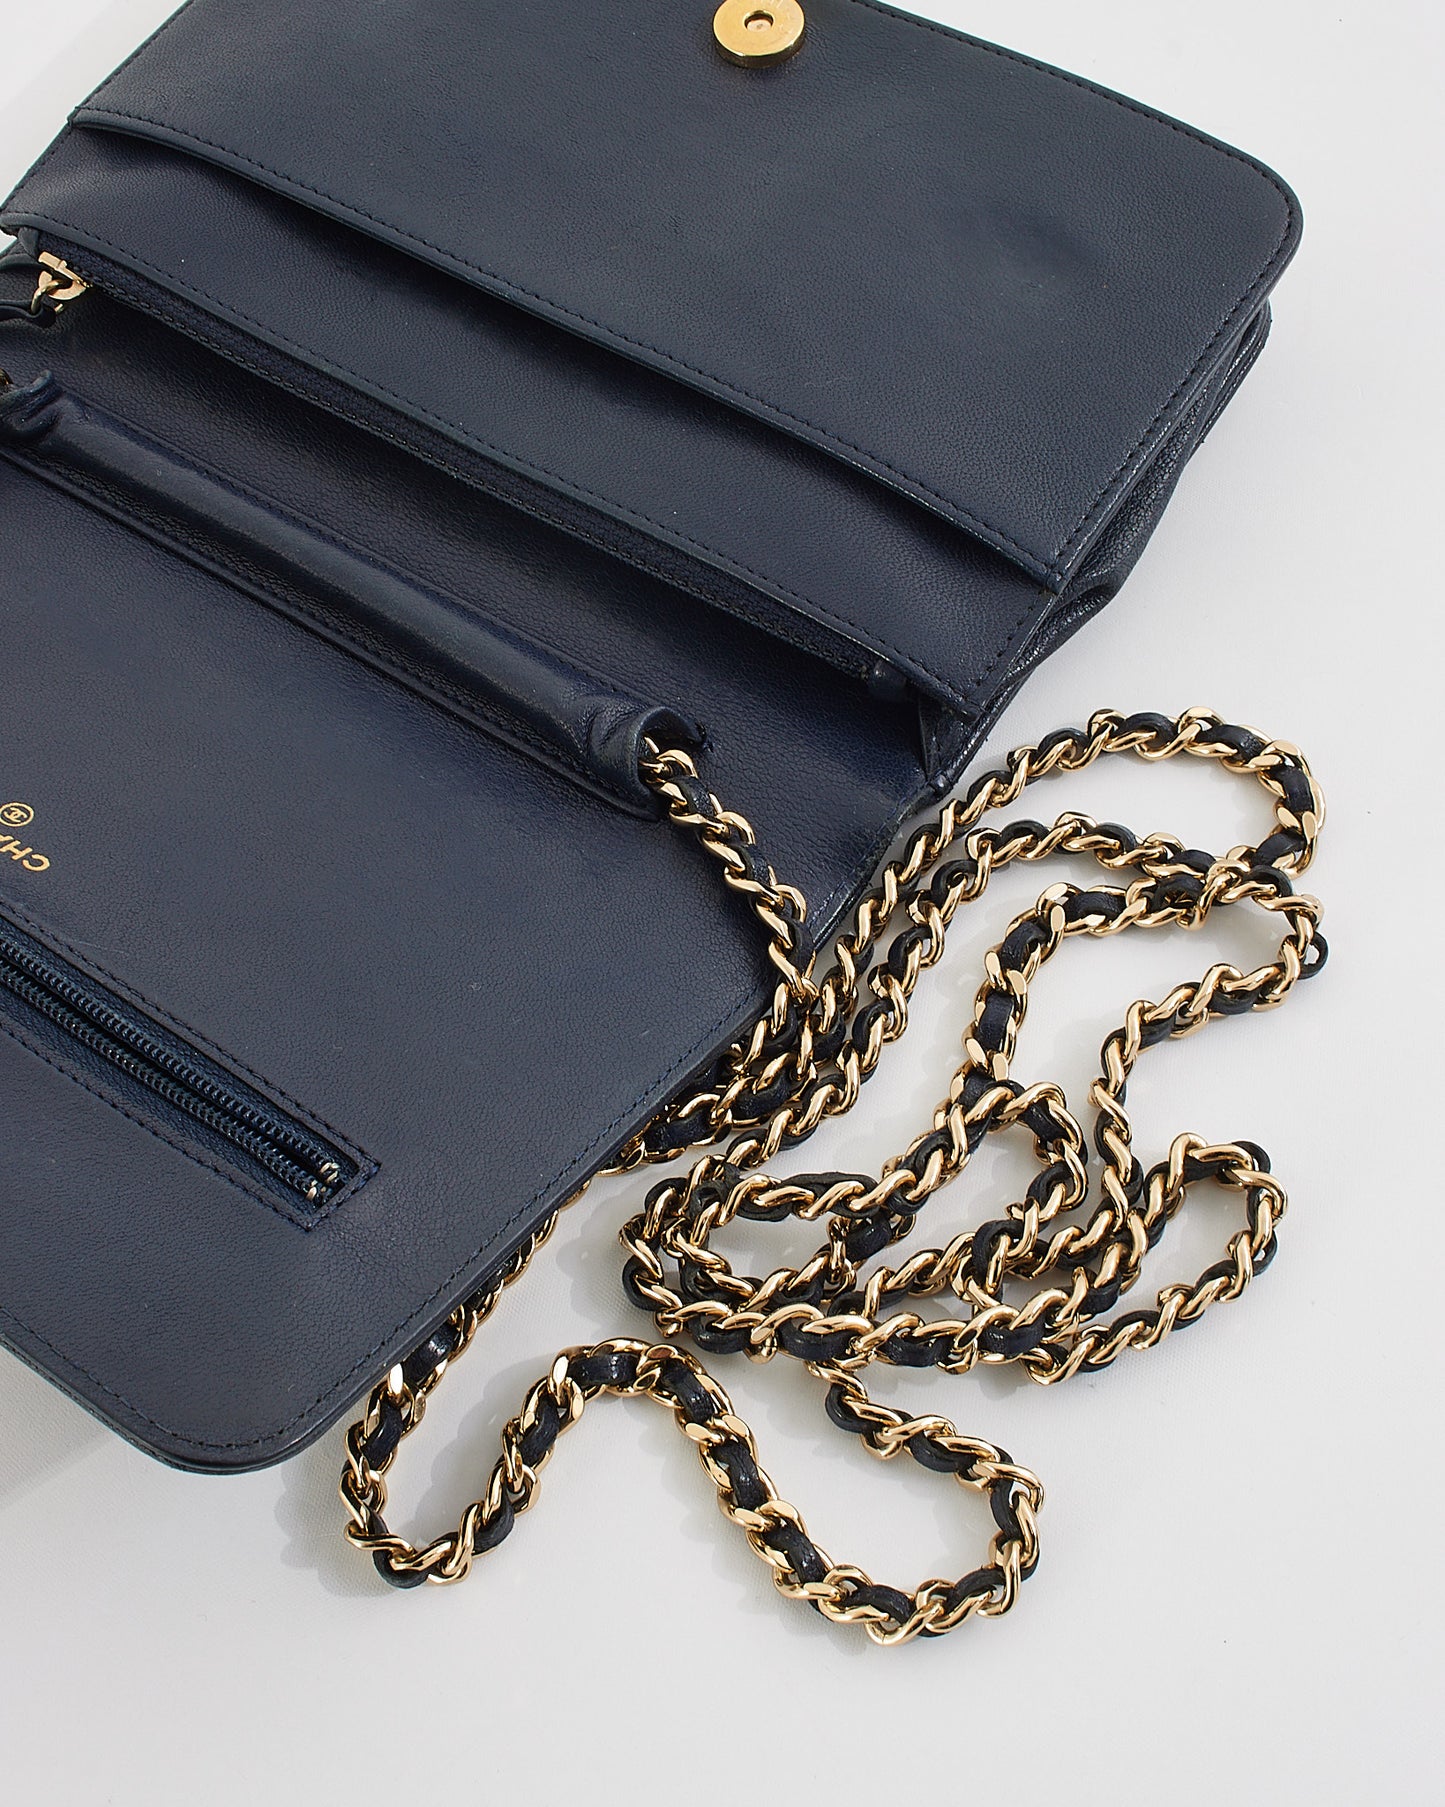 Chanel Navy Leather Mademoiselle Flap Wallet on Chain Bag